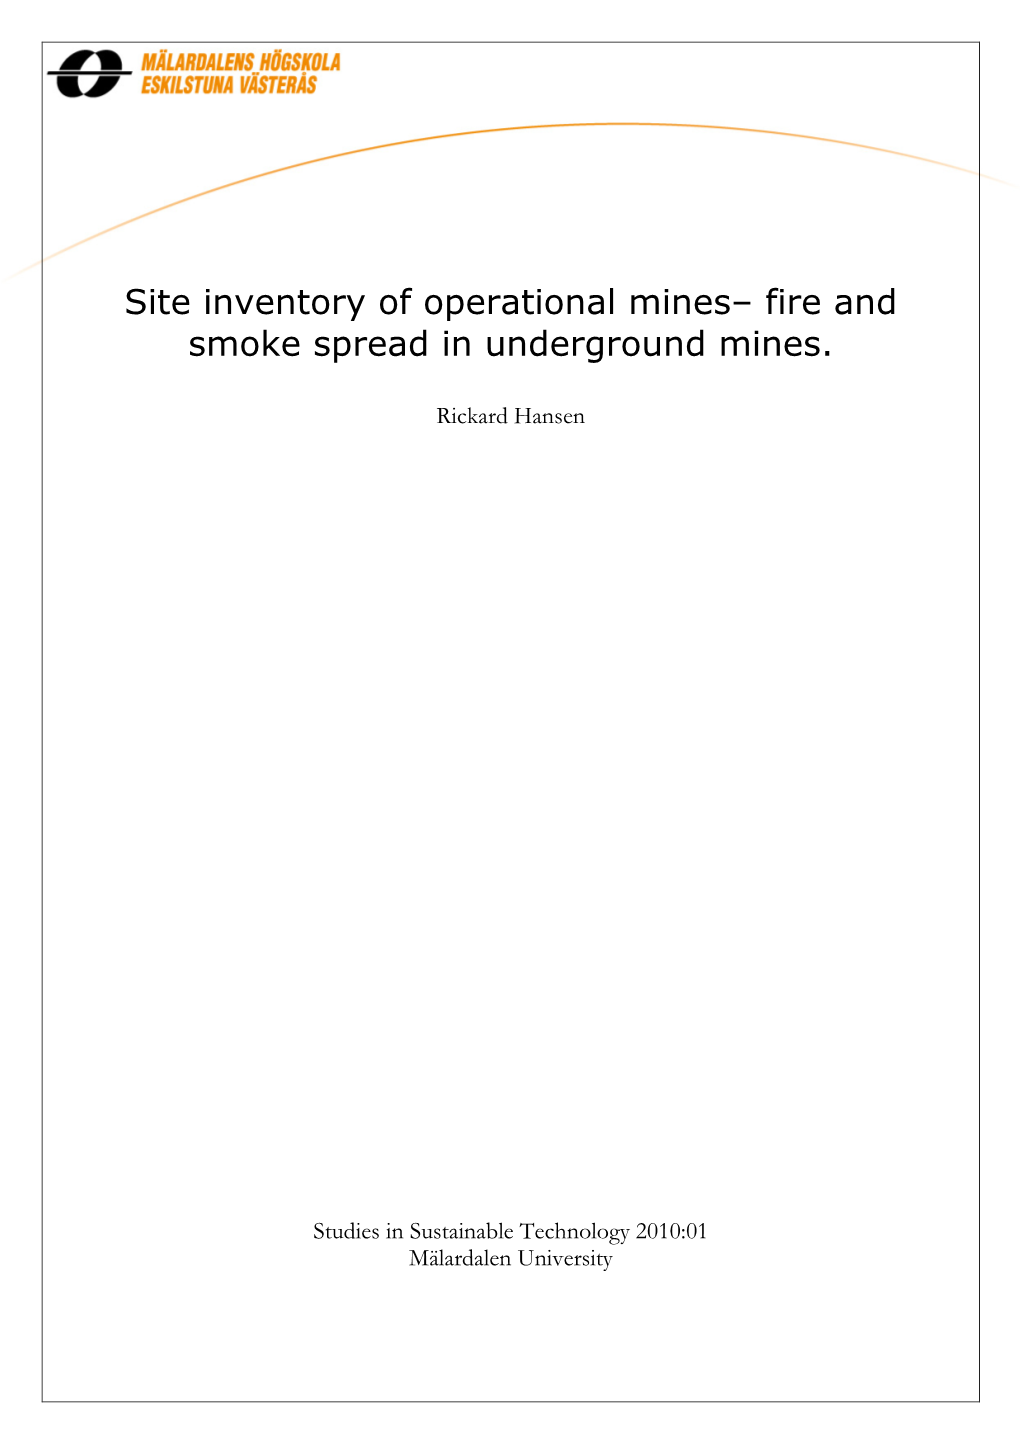 Fire and Smoke Spread in Underground Mines